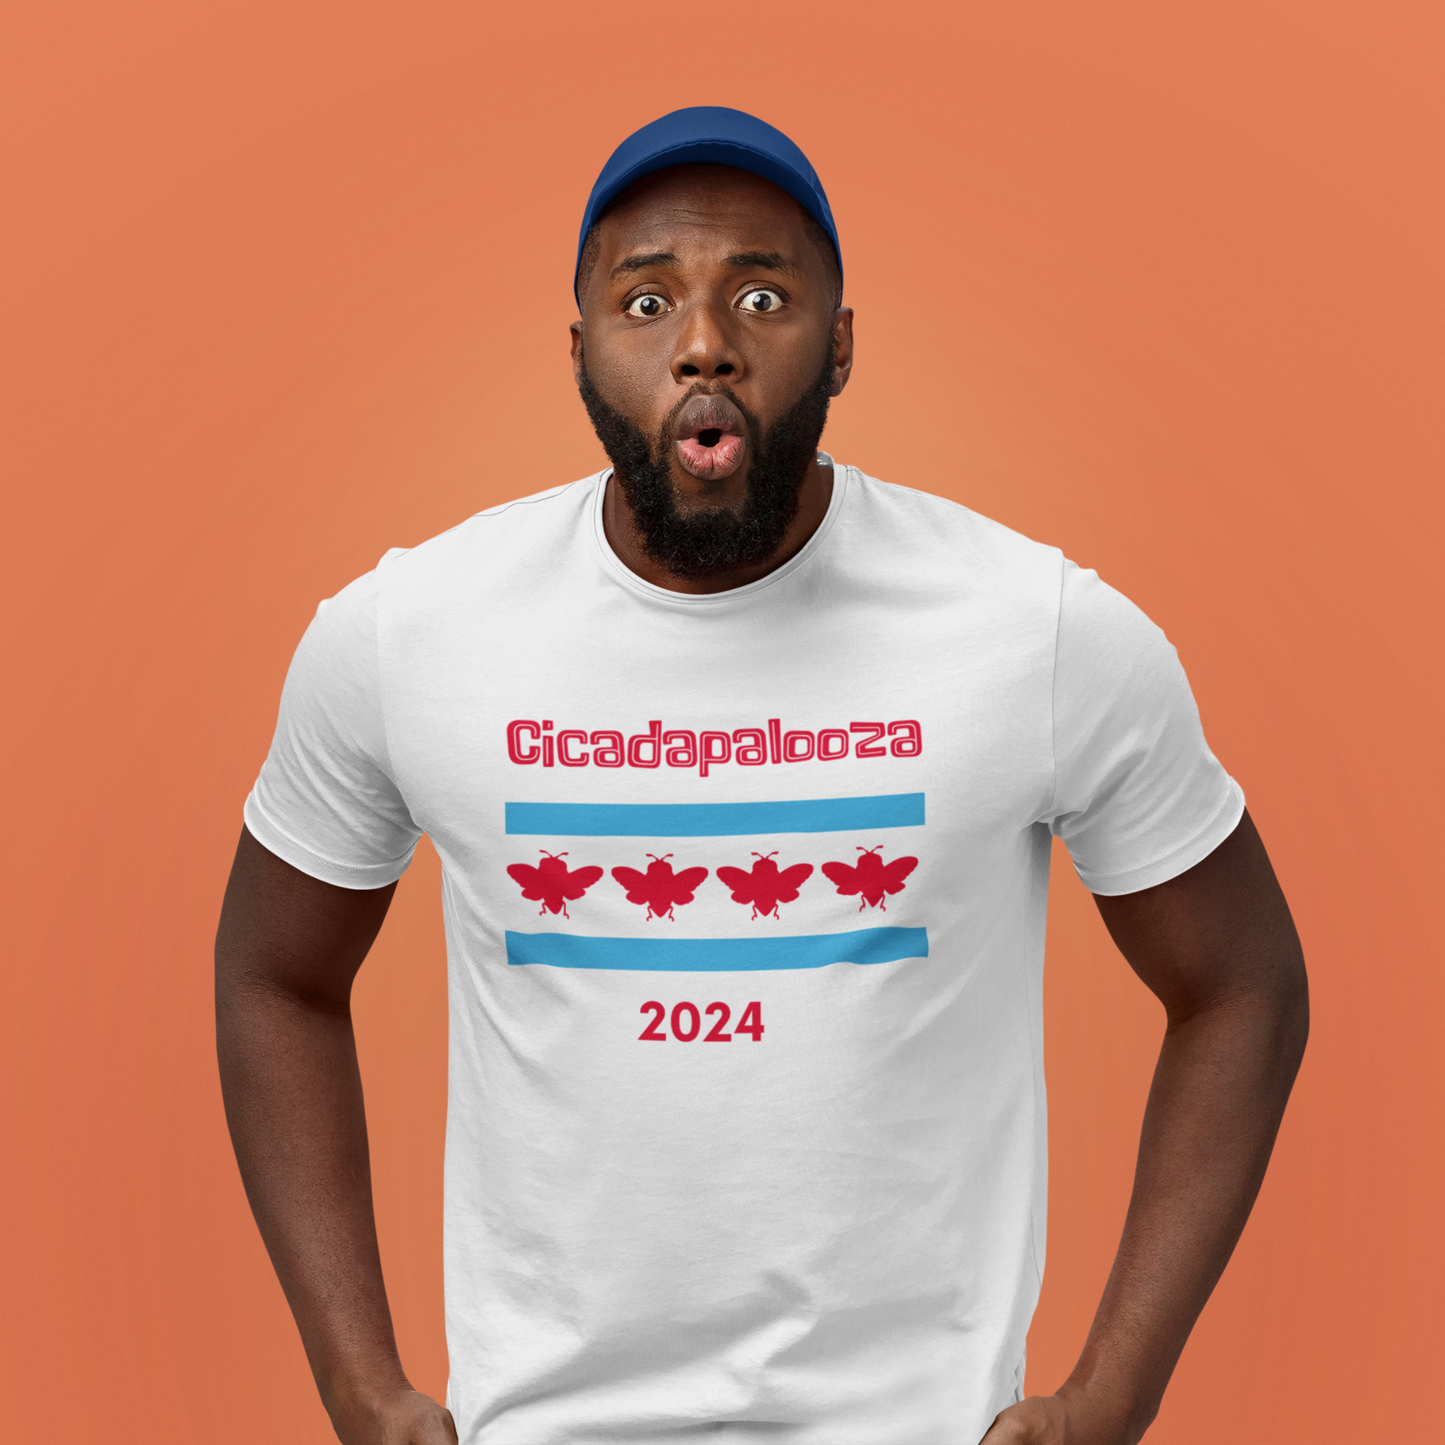 A fit  man wears a white t-shirt with the text "cicadapalooza" and the Chicago flag with the red stars replaced by cute, red cicadas. He has an expression of shock and fear on his face.